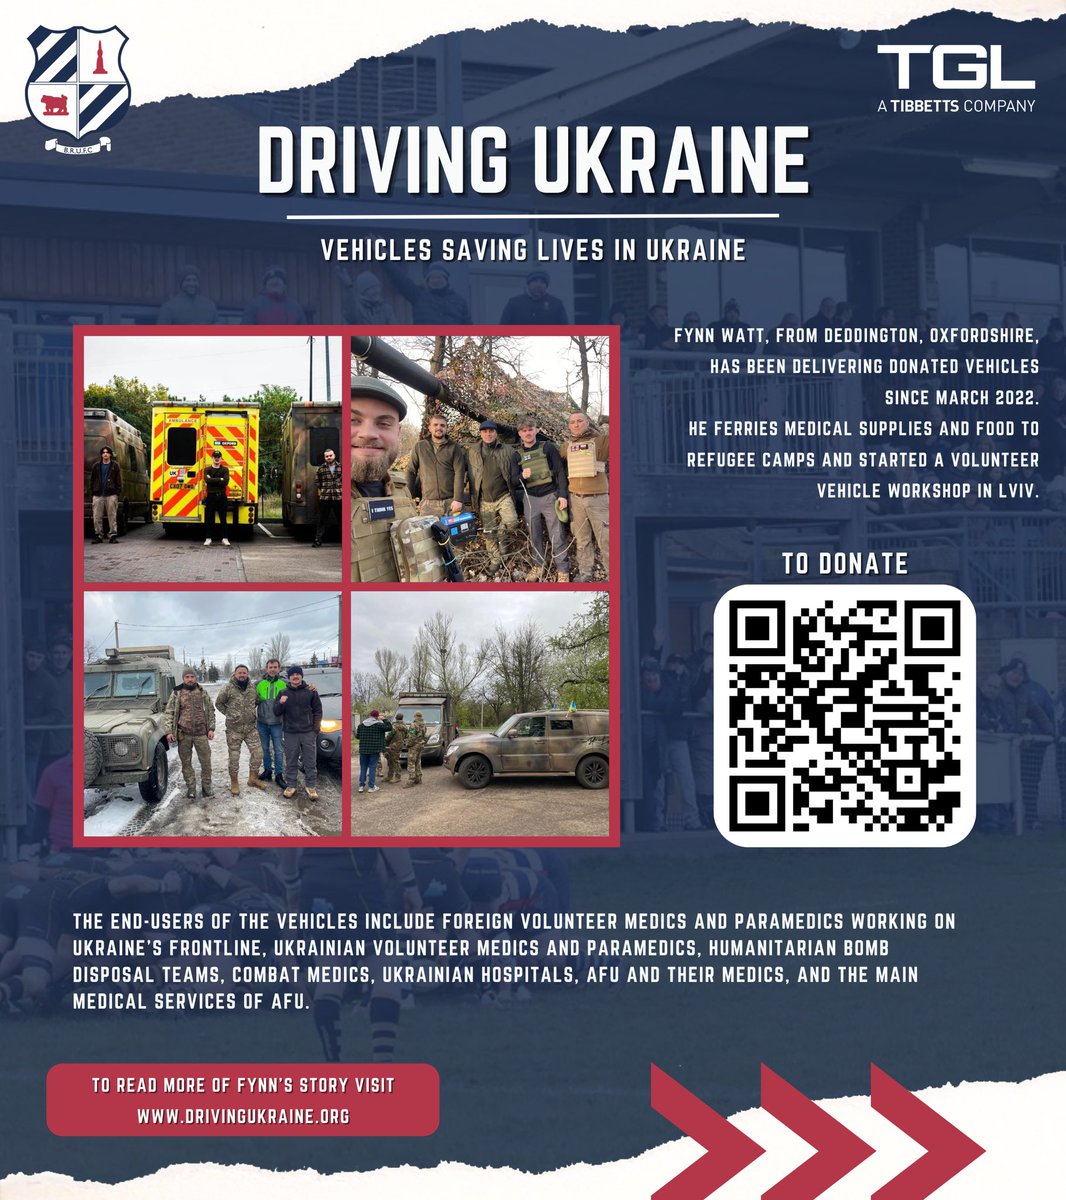 𝗗𝗥𝗜𝗩𝗜𝗡𝗚 𝗨𝗞𝗥𝗔𝗜𝗡𝗘 The organisation works together to deliver vehicles and essential medical supplies to Ukraine during the current conflict. banburyrufc.com/news/driving-u… #BanburyRUFC #Rugby #Bulls 🐂